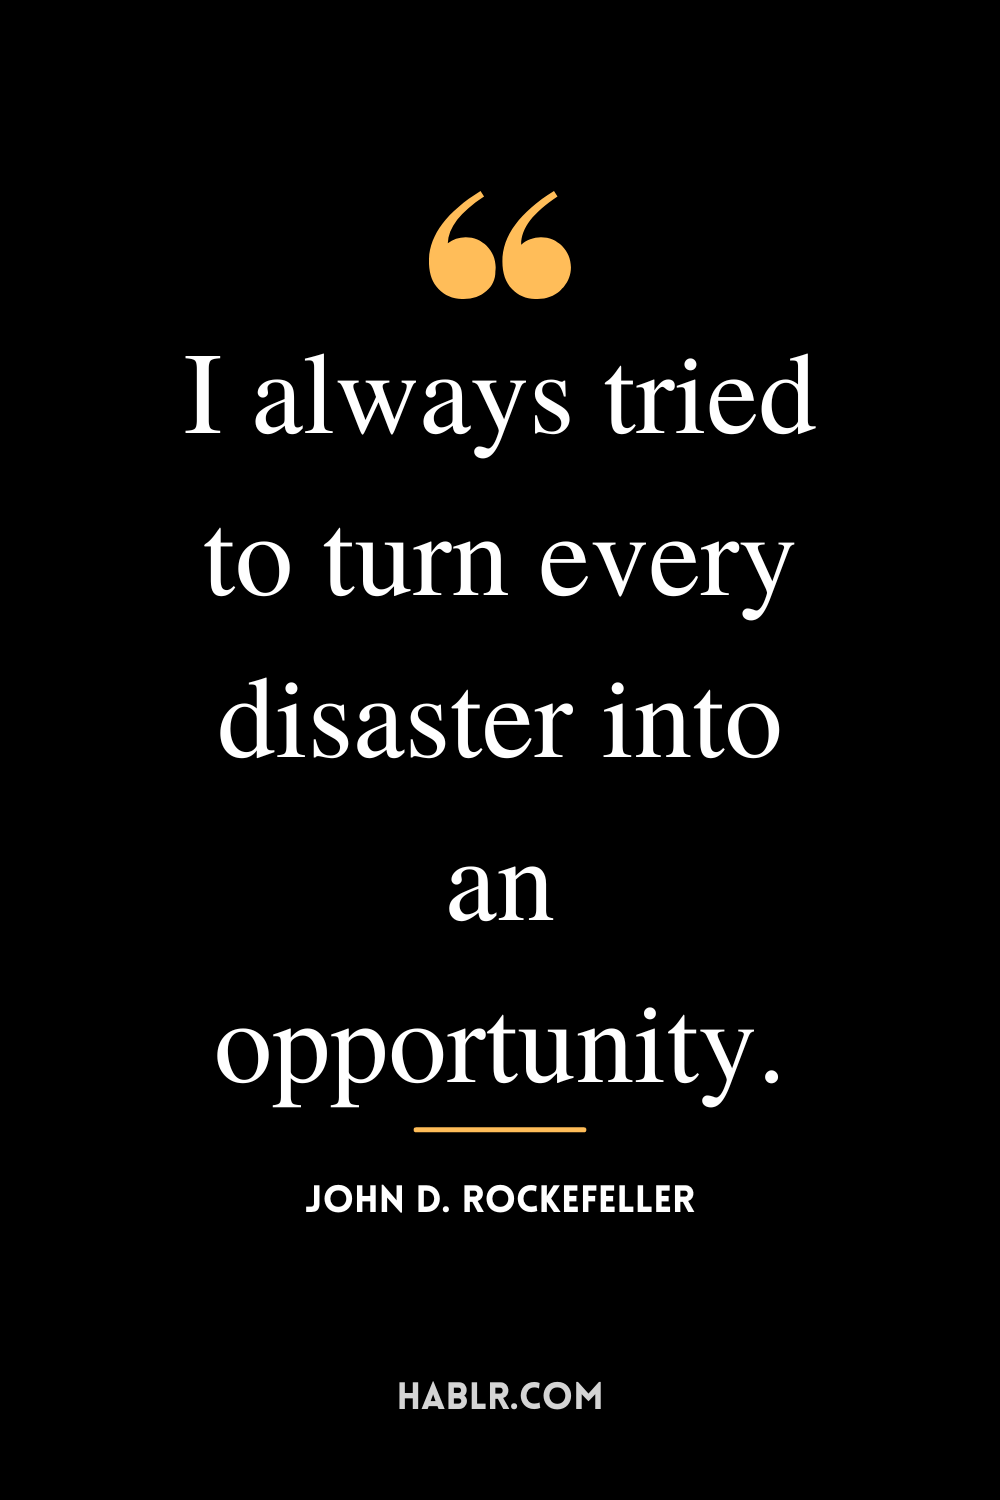 “I always tried to turn every disaster into an opportunity.” -John D. Rockefeller